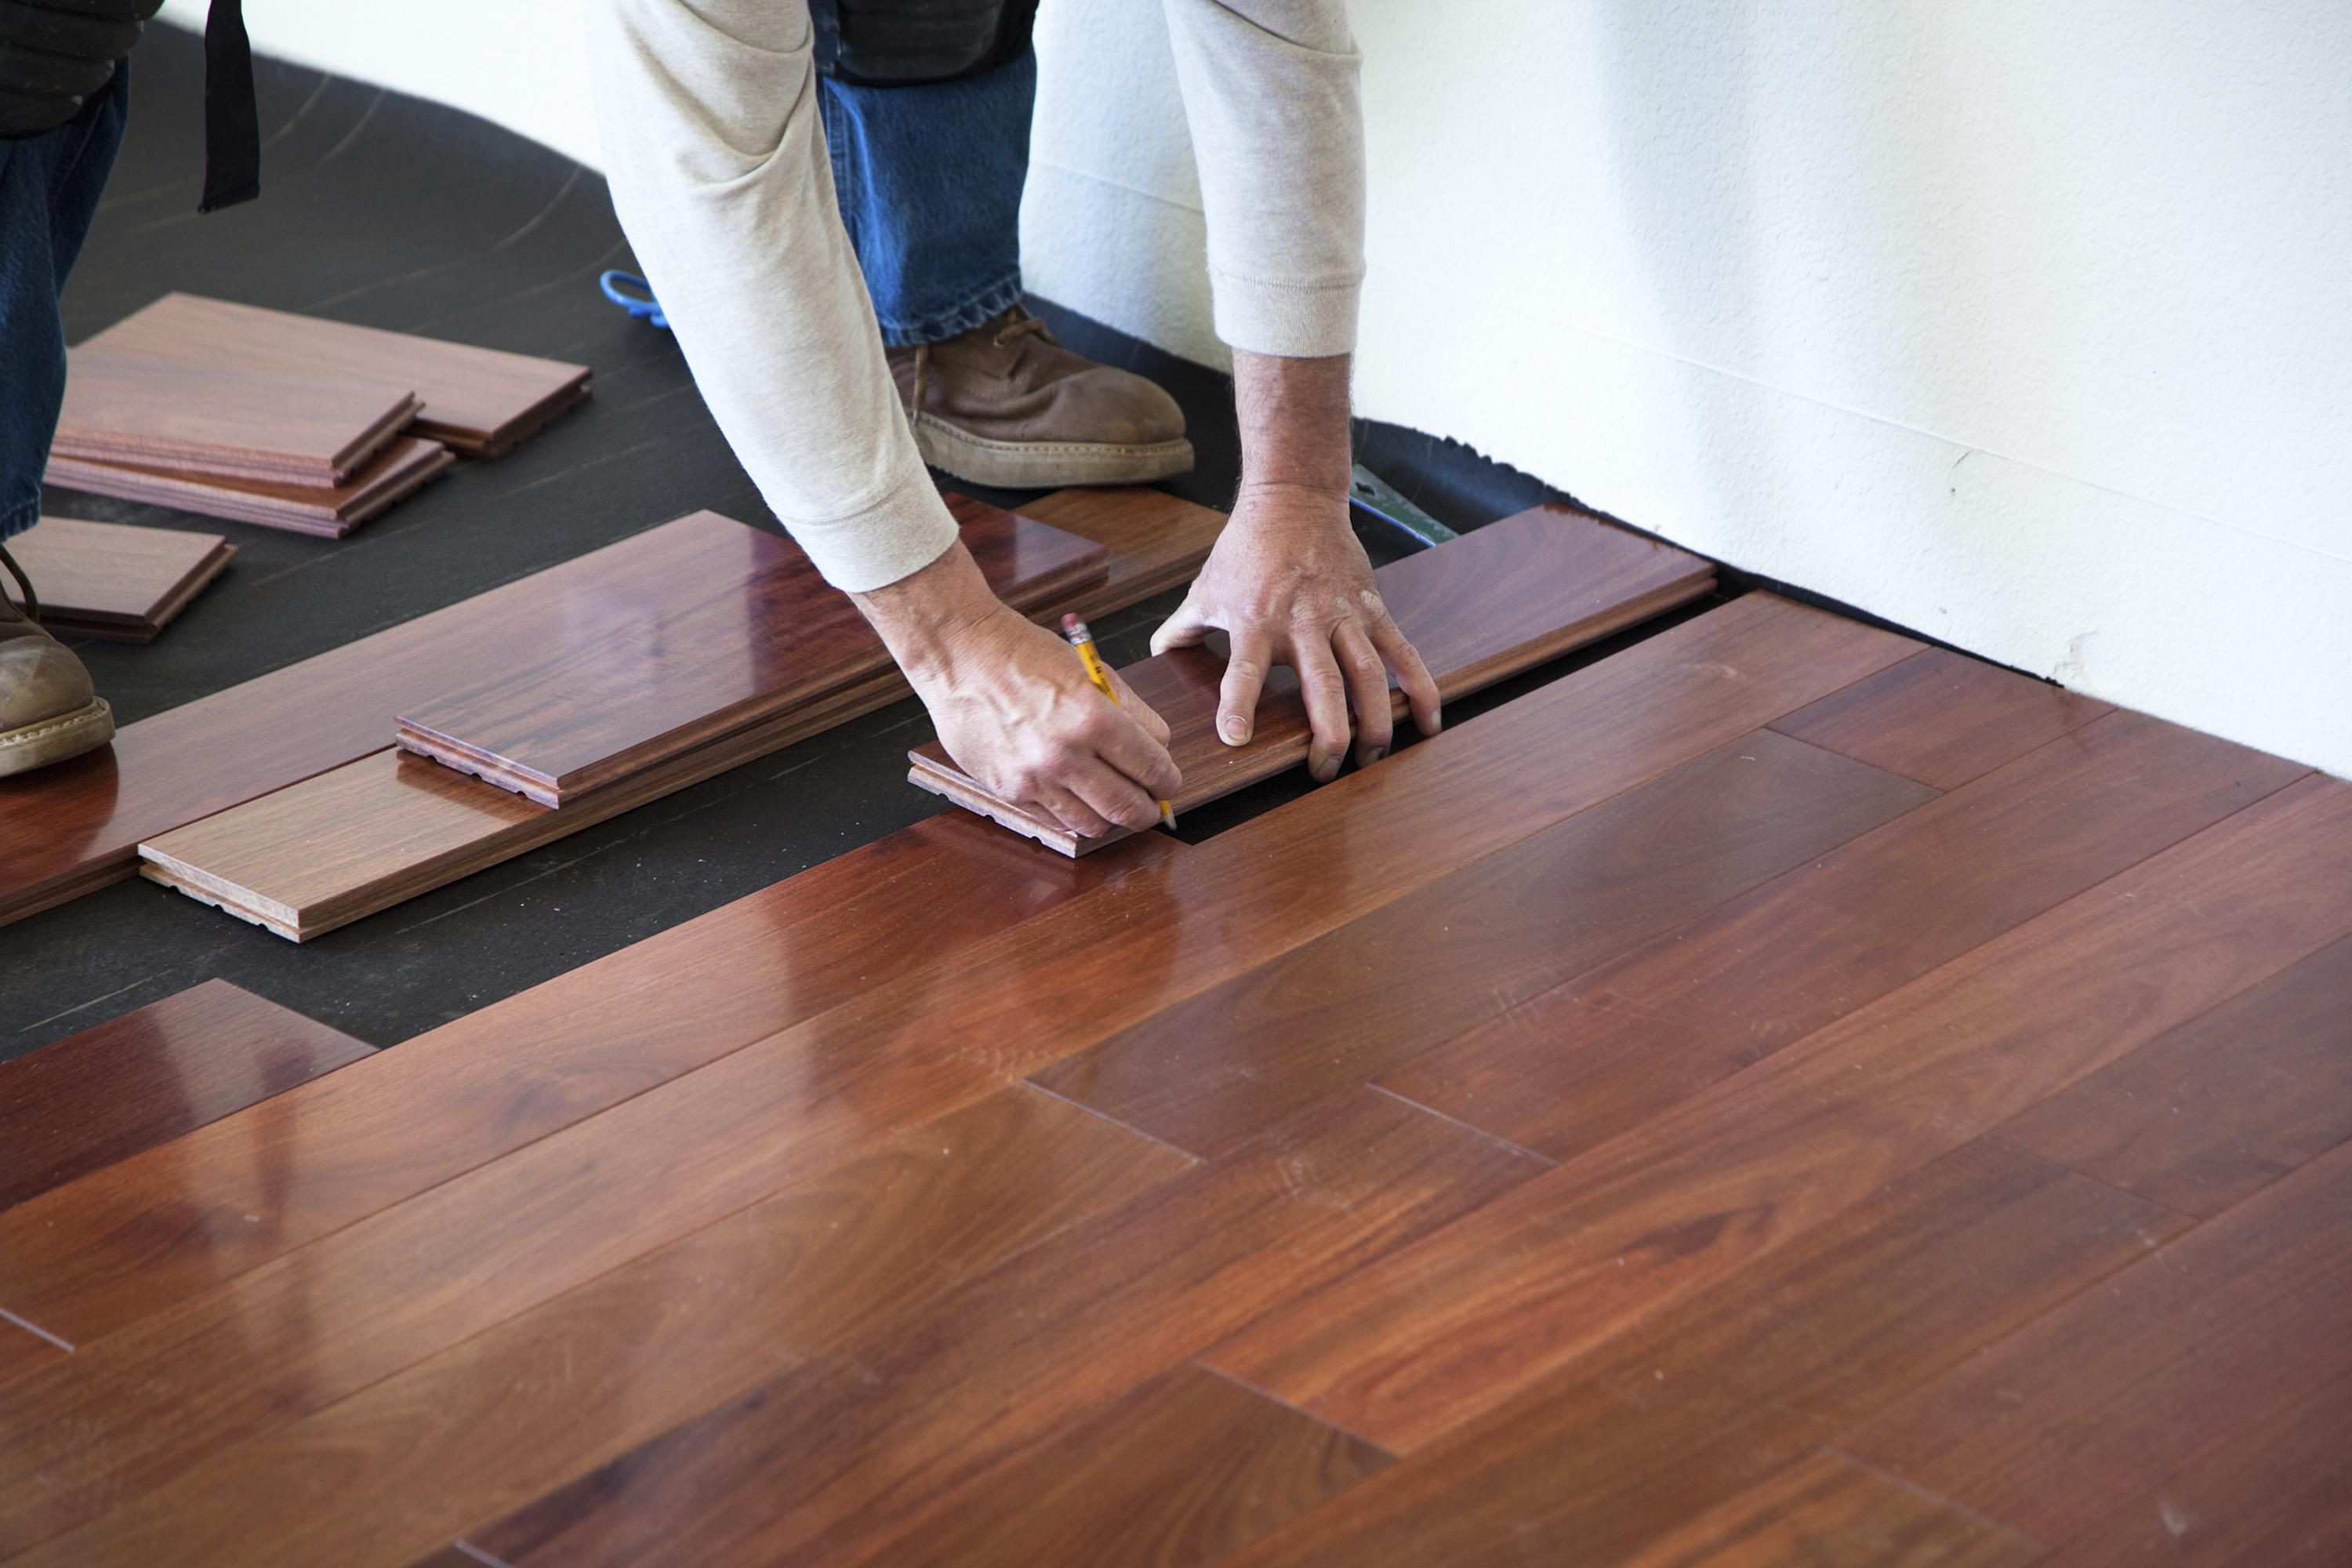 20 Popular How to Refurbish Hardwood Floors Yourself 2024 free download how to refurbish hardwood floors yourself of this is how much hardwood flooring to order for 170040982 56a49f213df78cf772834e21